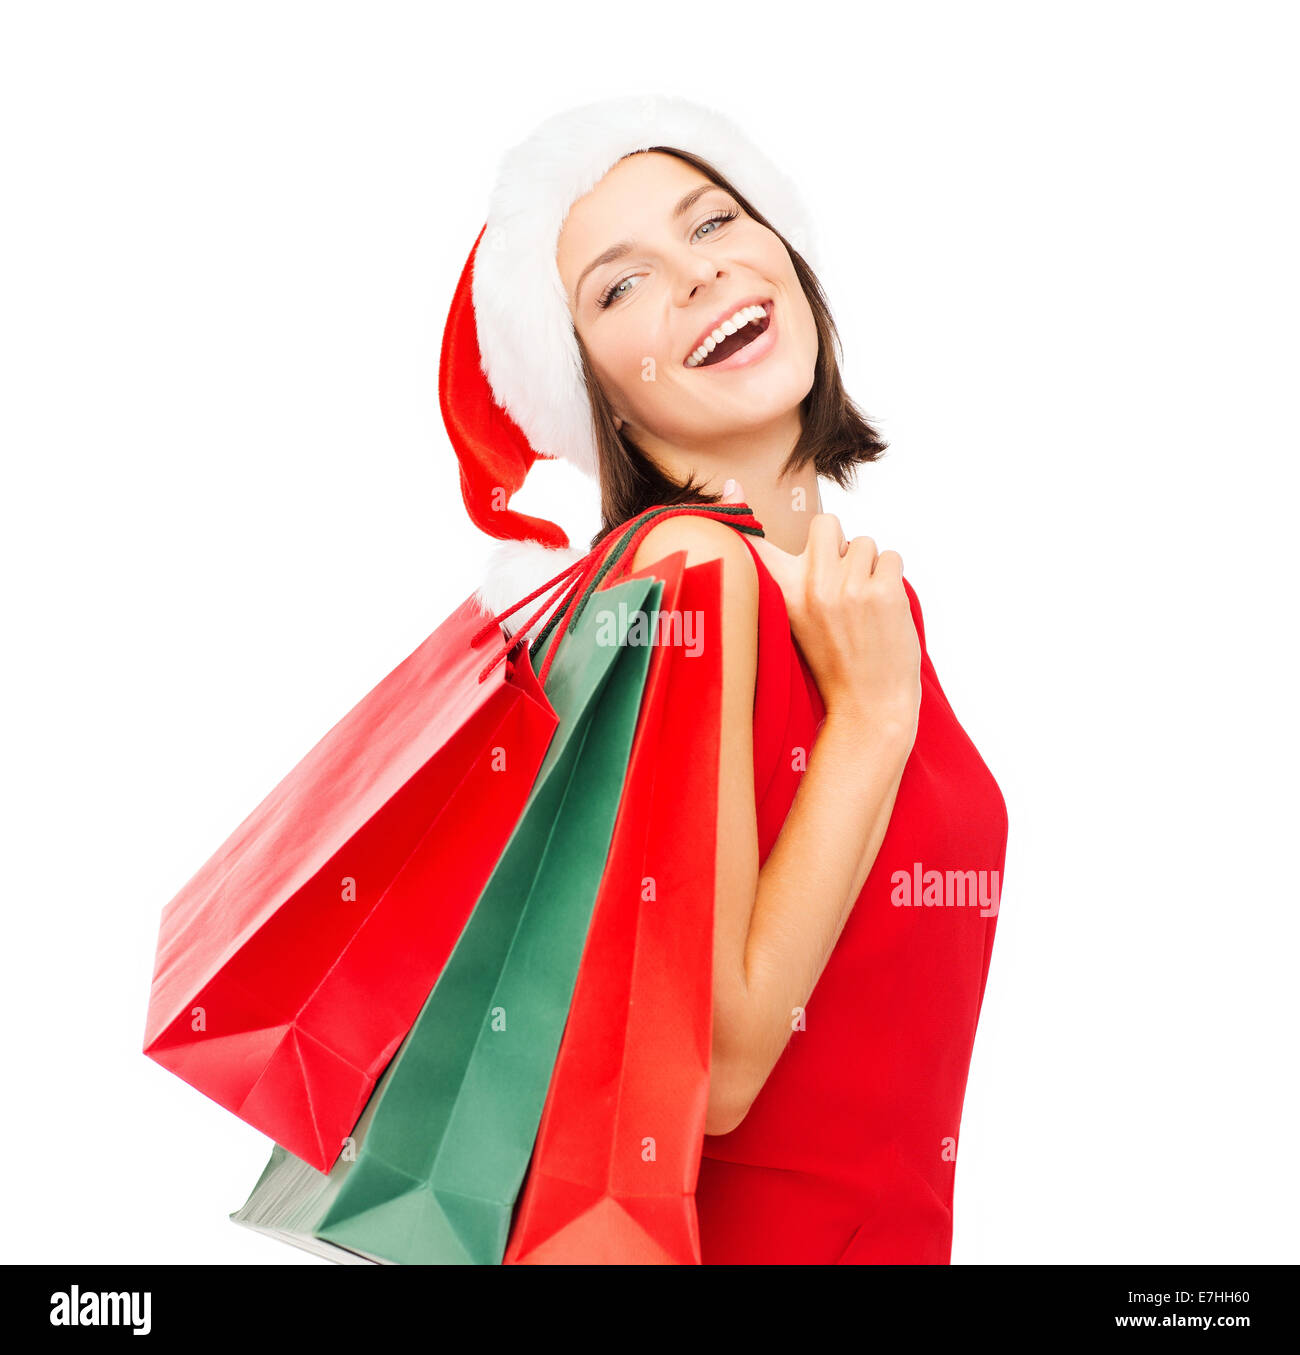 woman in red dress with shopping bags Stock Photo